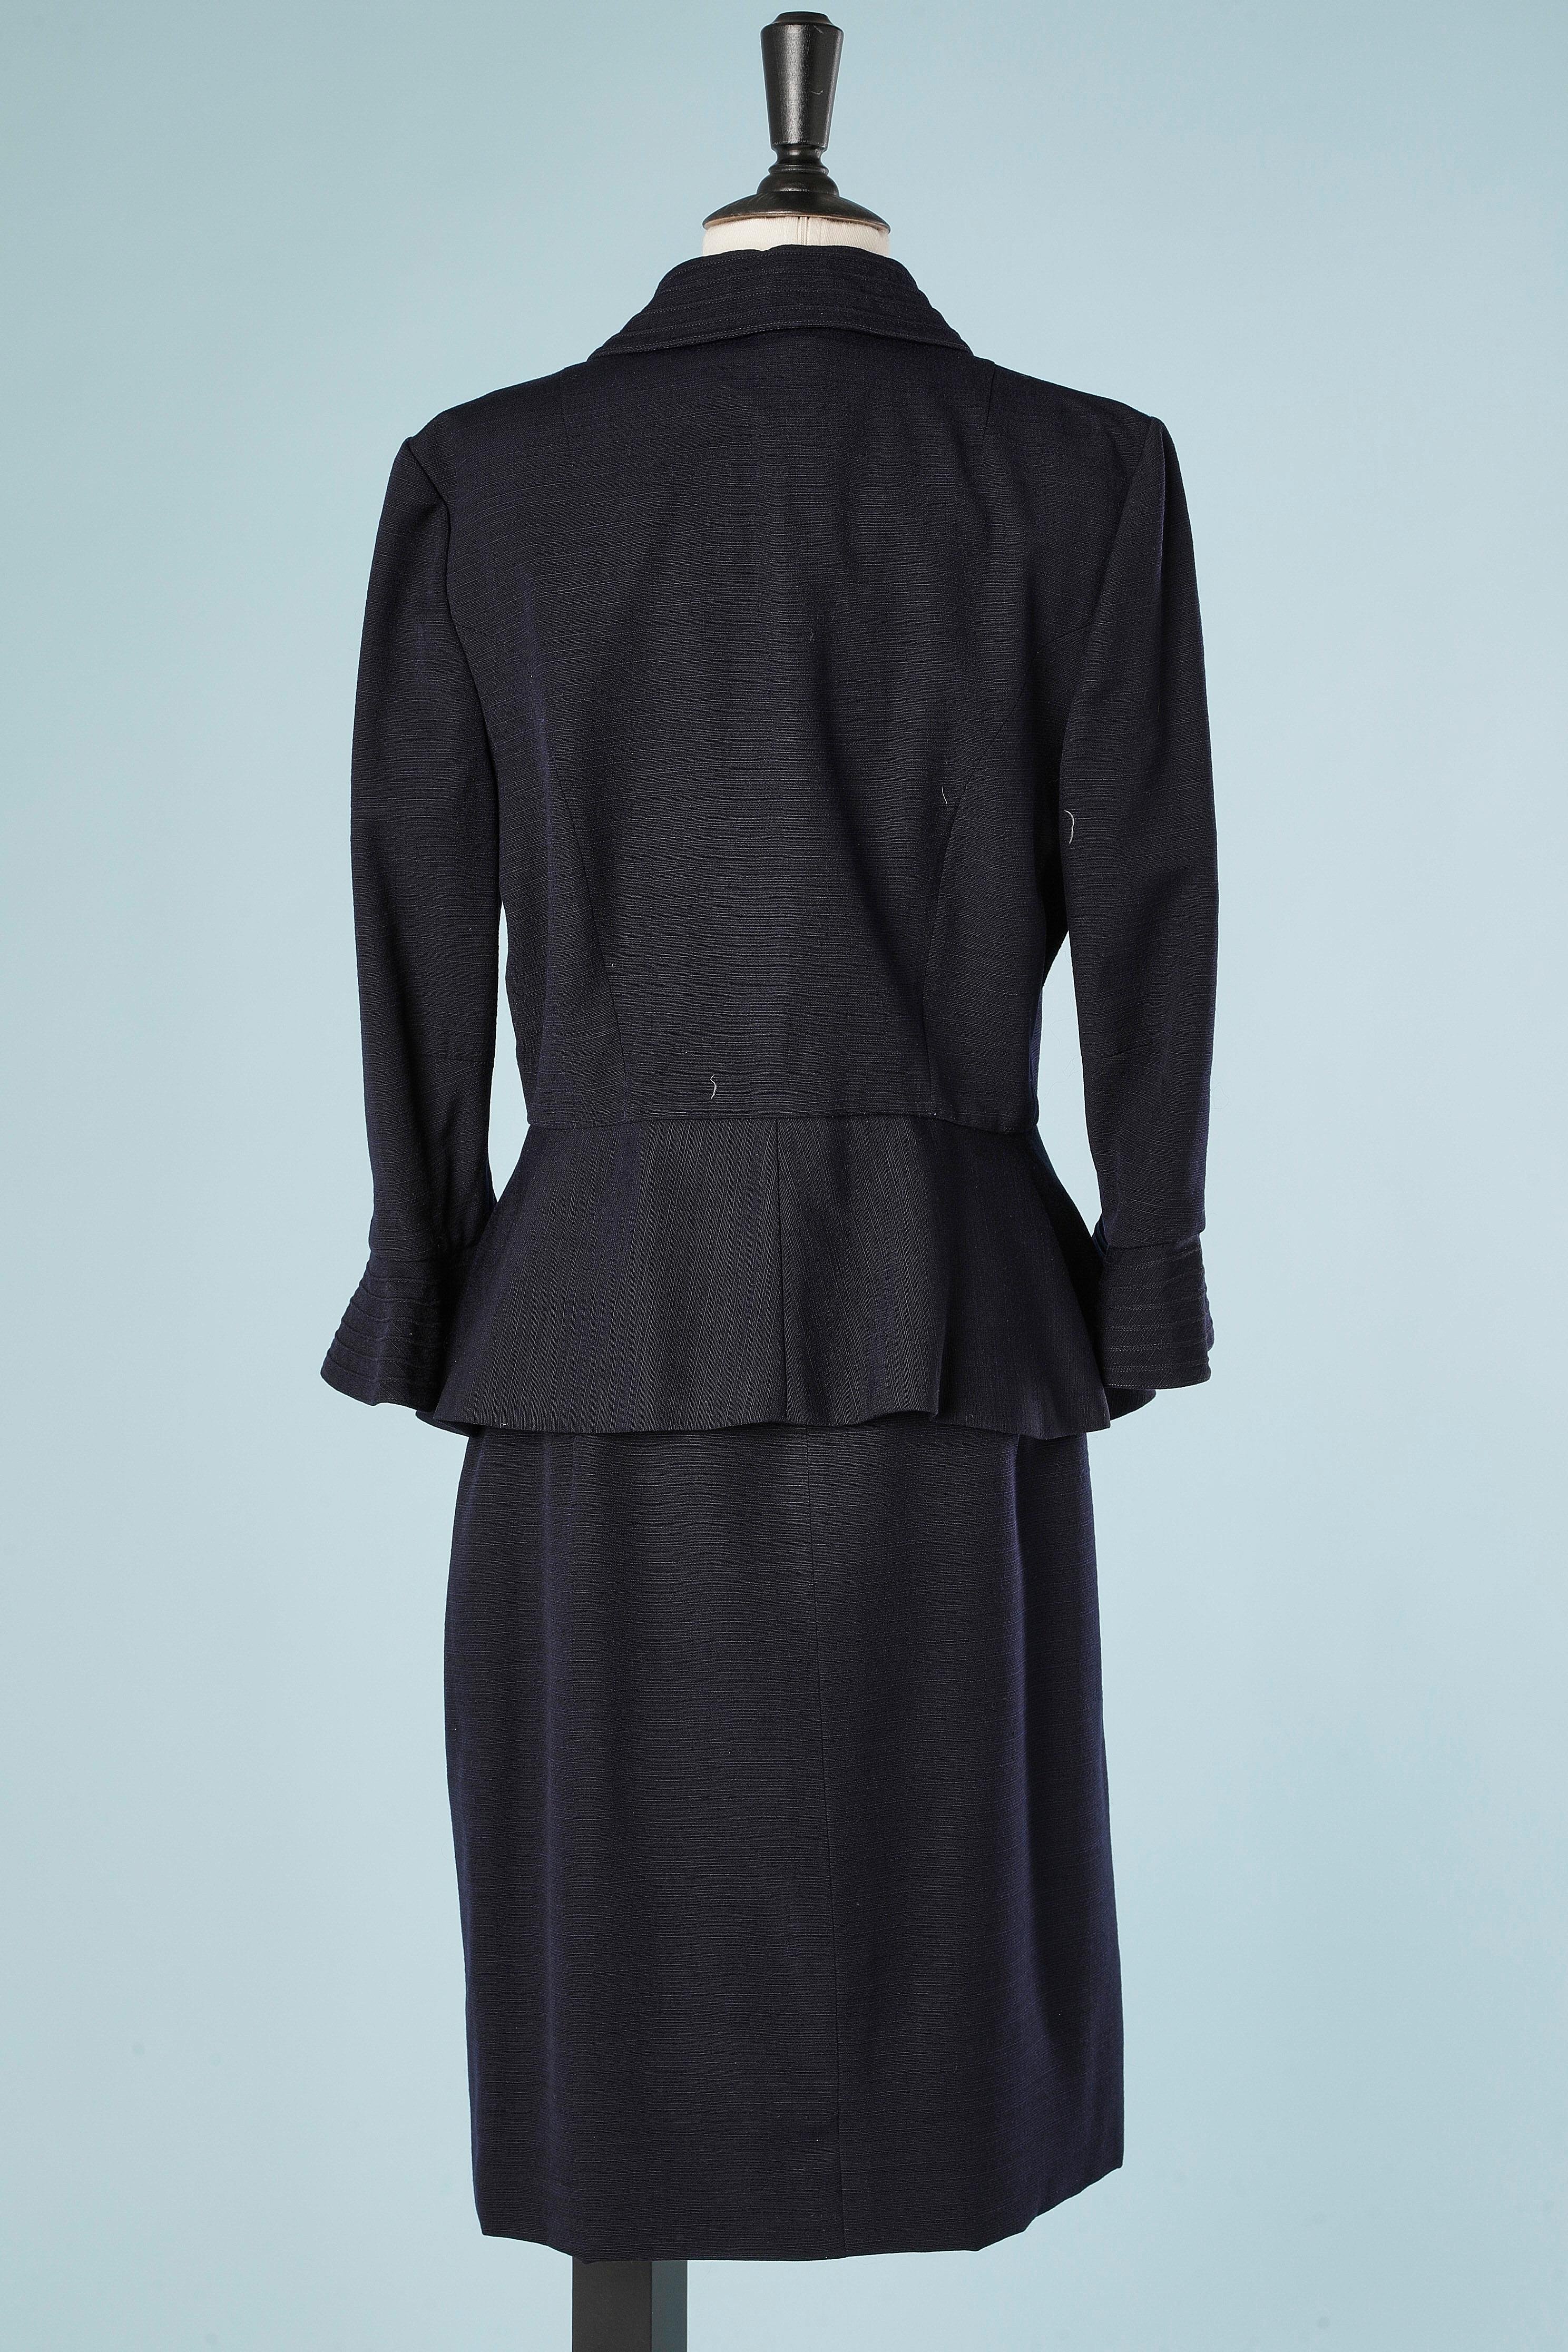 Navy blue wool skirt suit with top-stitching Lilli Ann Circa 1940 For Sale 1